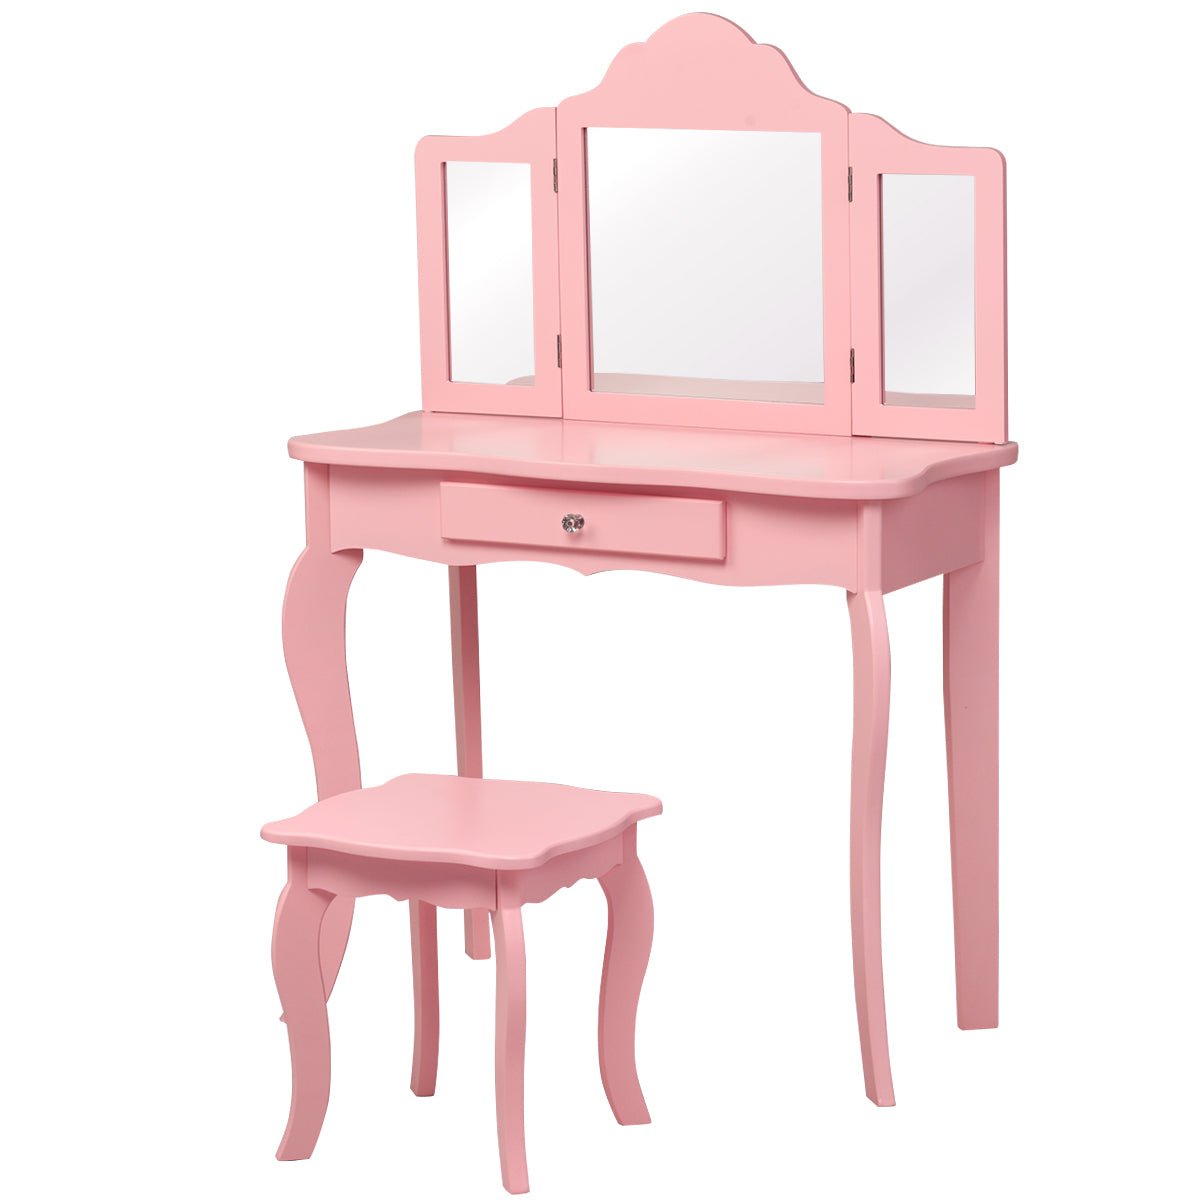 Kids Dressing Table Set with Stool & Mirror - Spark Creativity and Play